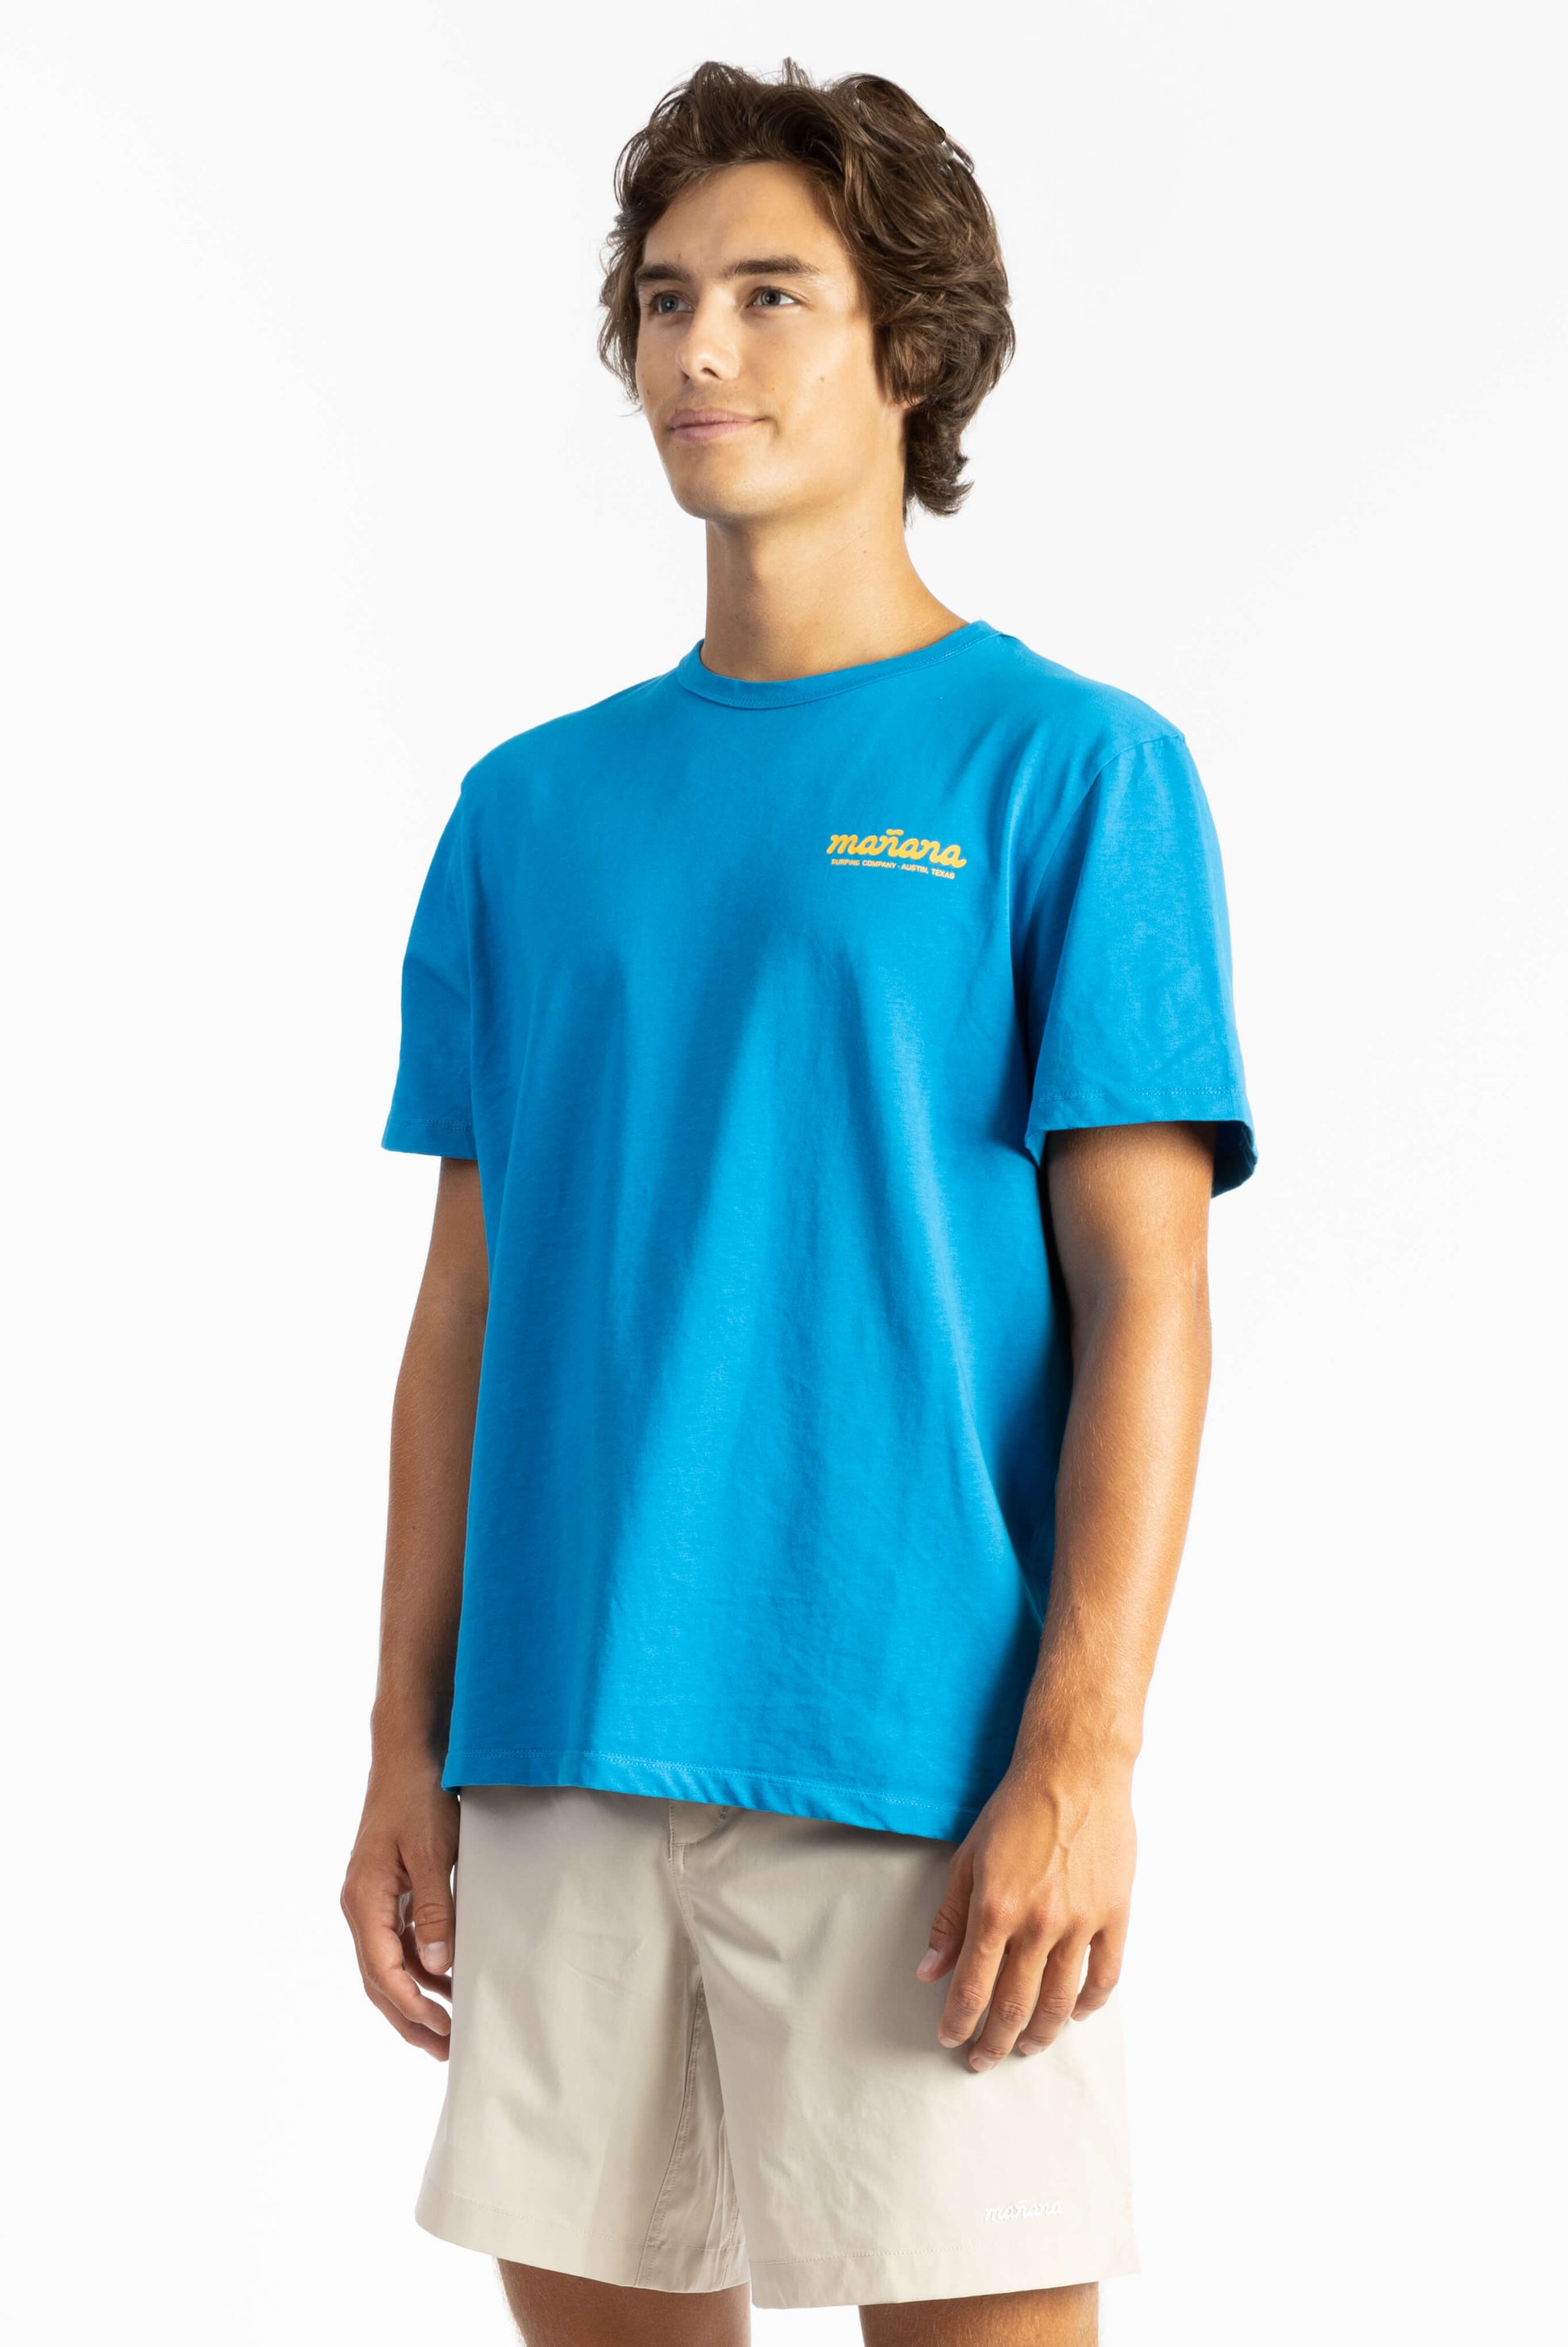 picture of a man wearing an ocean blue tee shirt with manana branding and white shorts